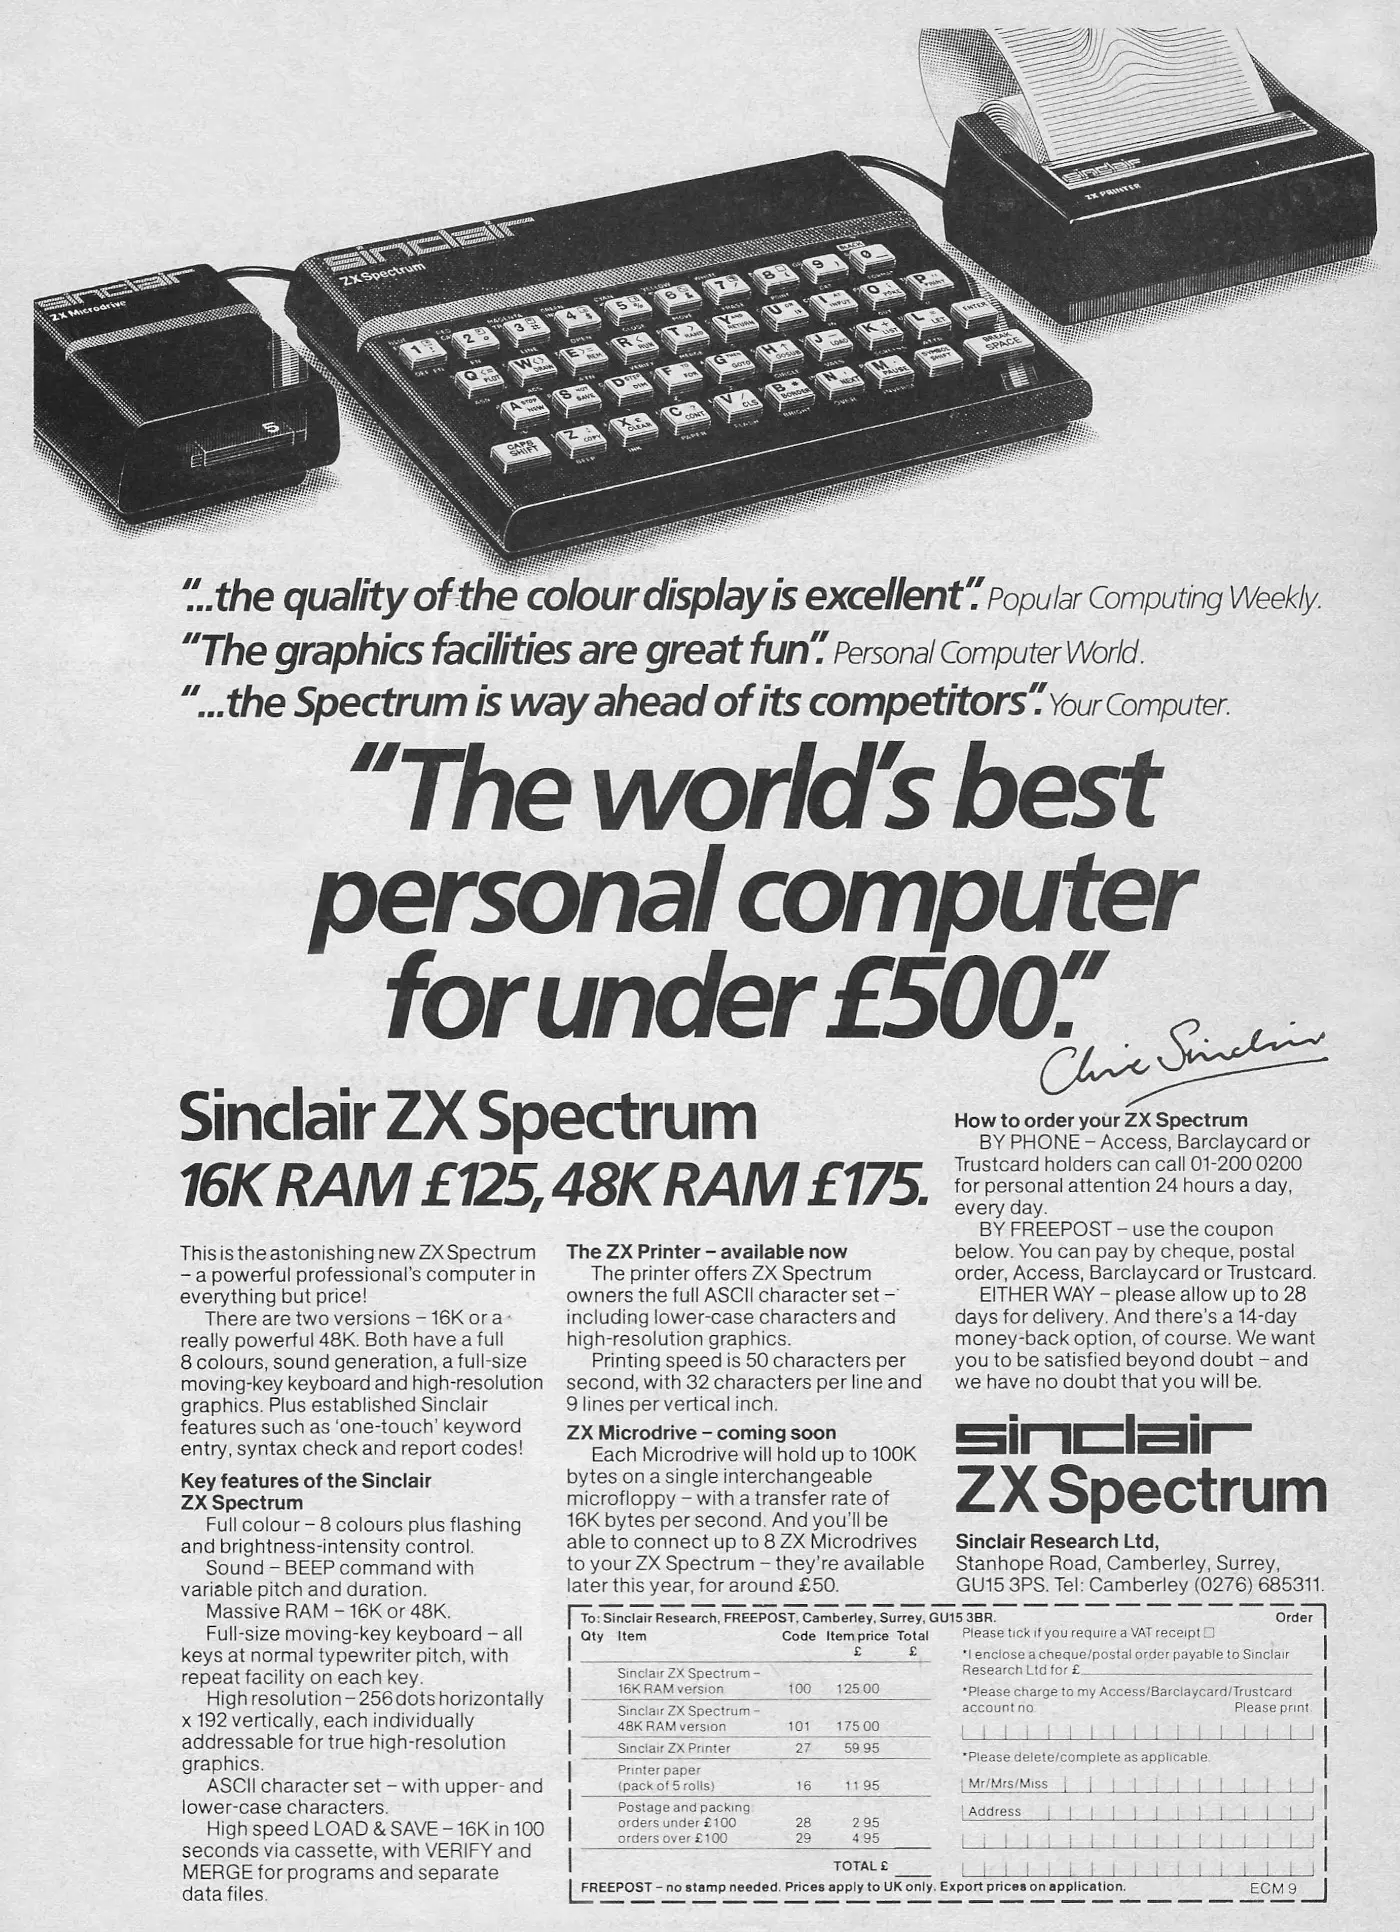 Sinclair Advert: The world's best personal computer for under £500, from Electronics and Computing, September 1982